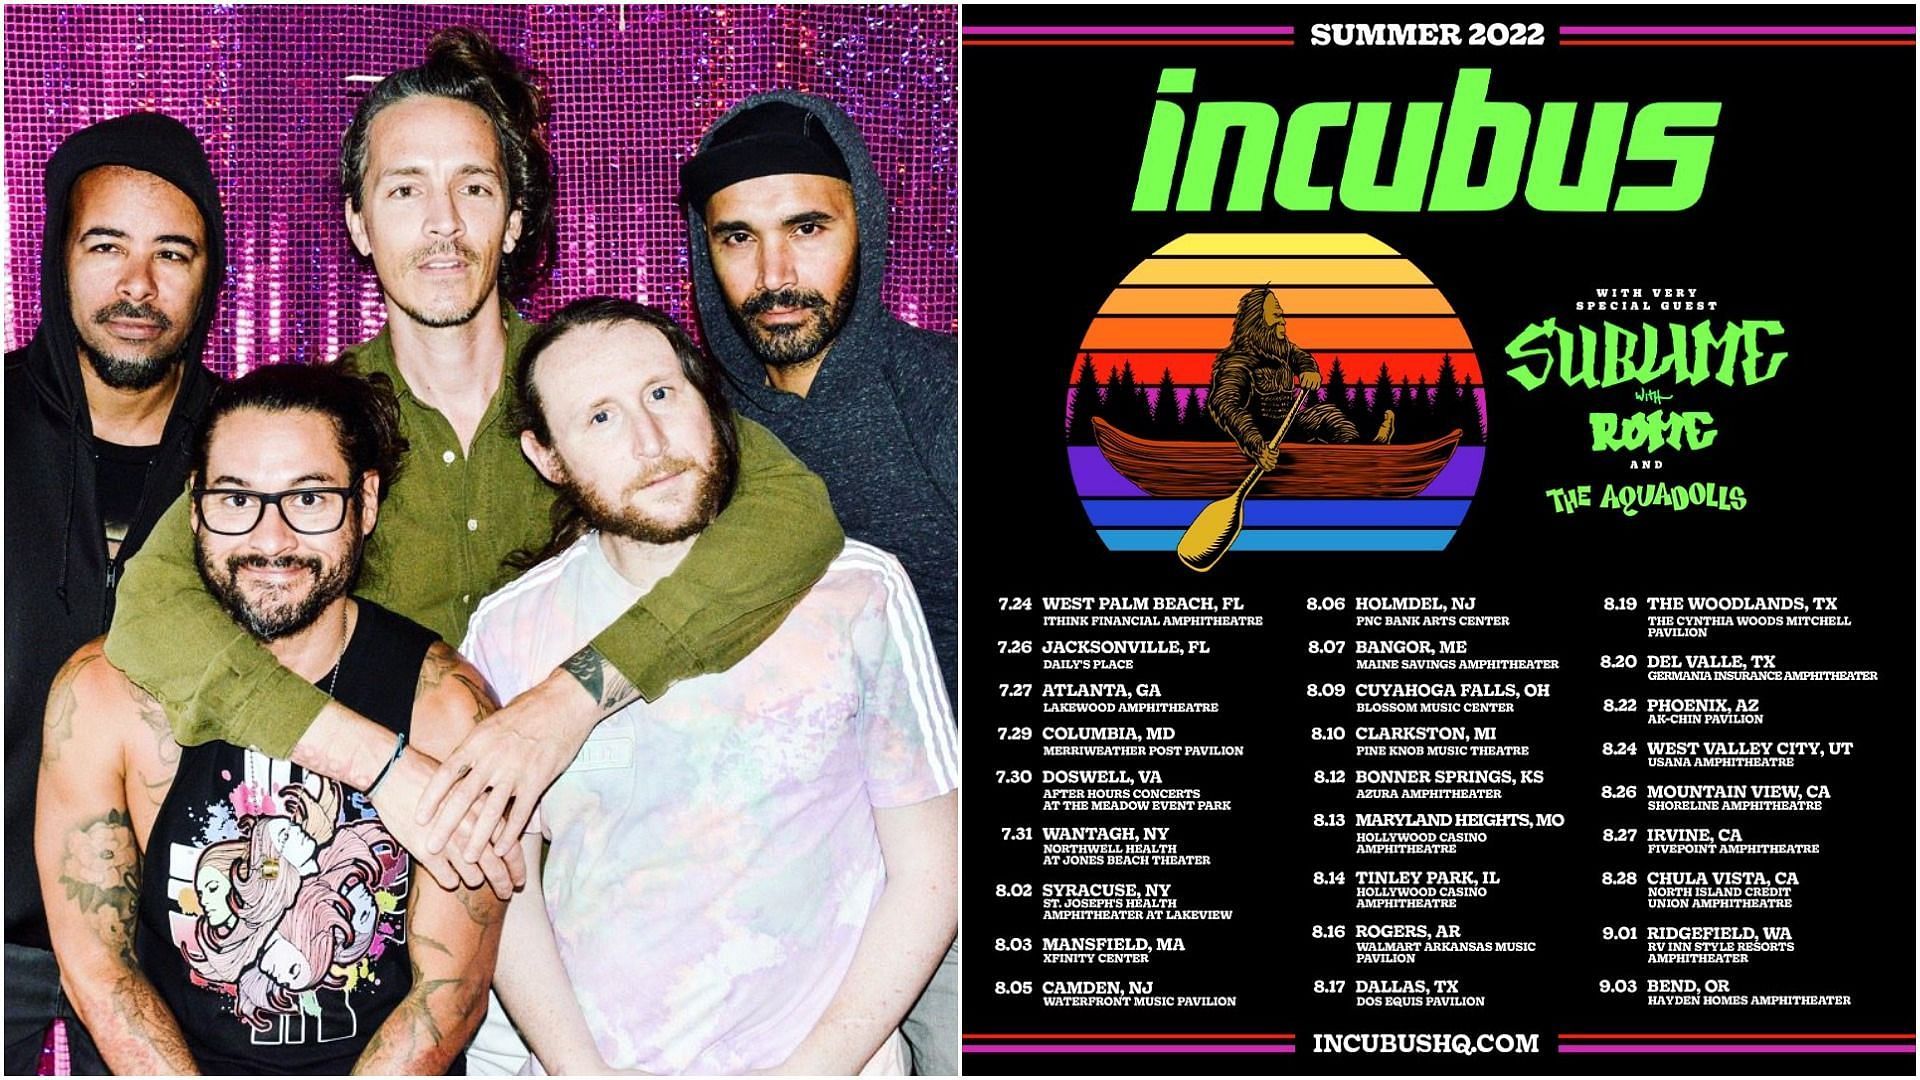 Incubus Summer Tour 2022 tickets Where to buy, price, dates